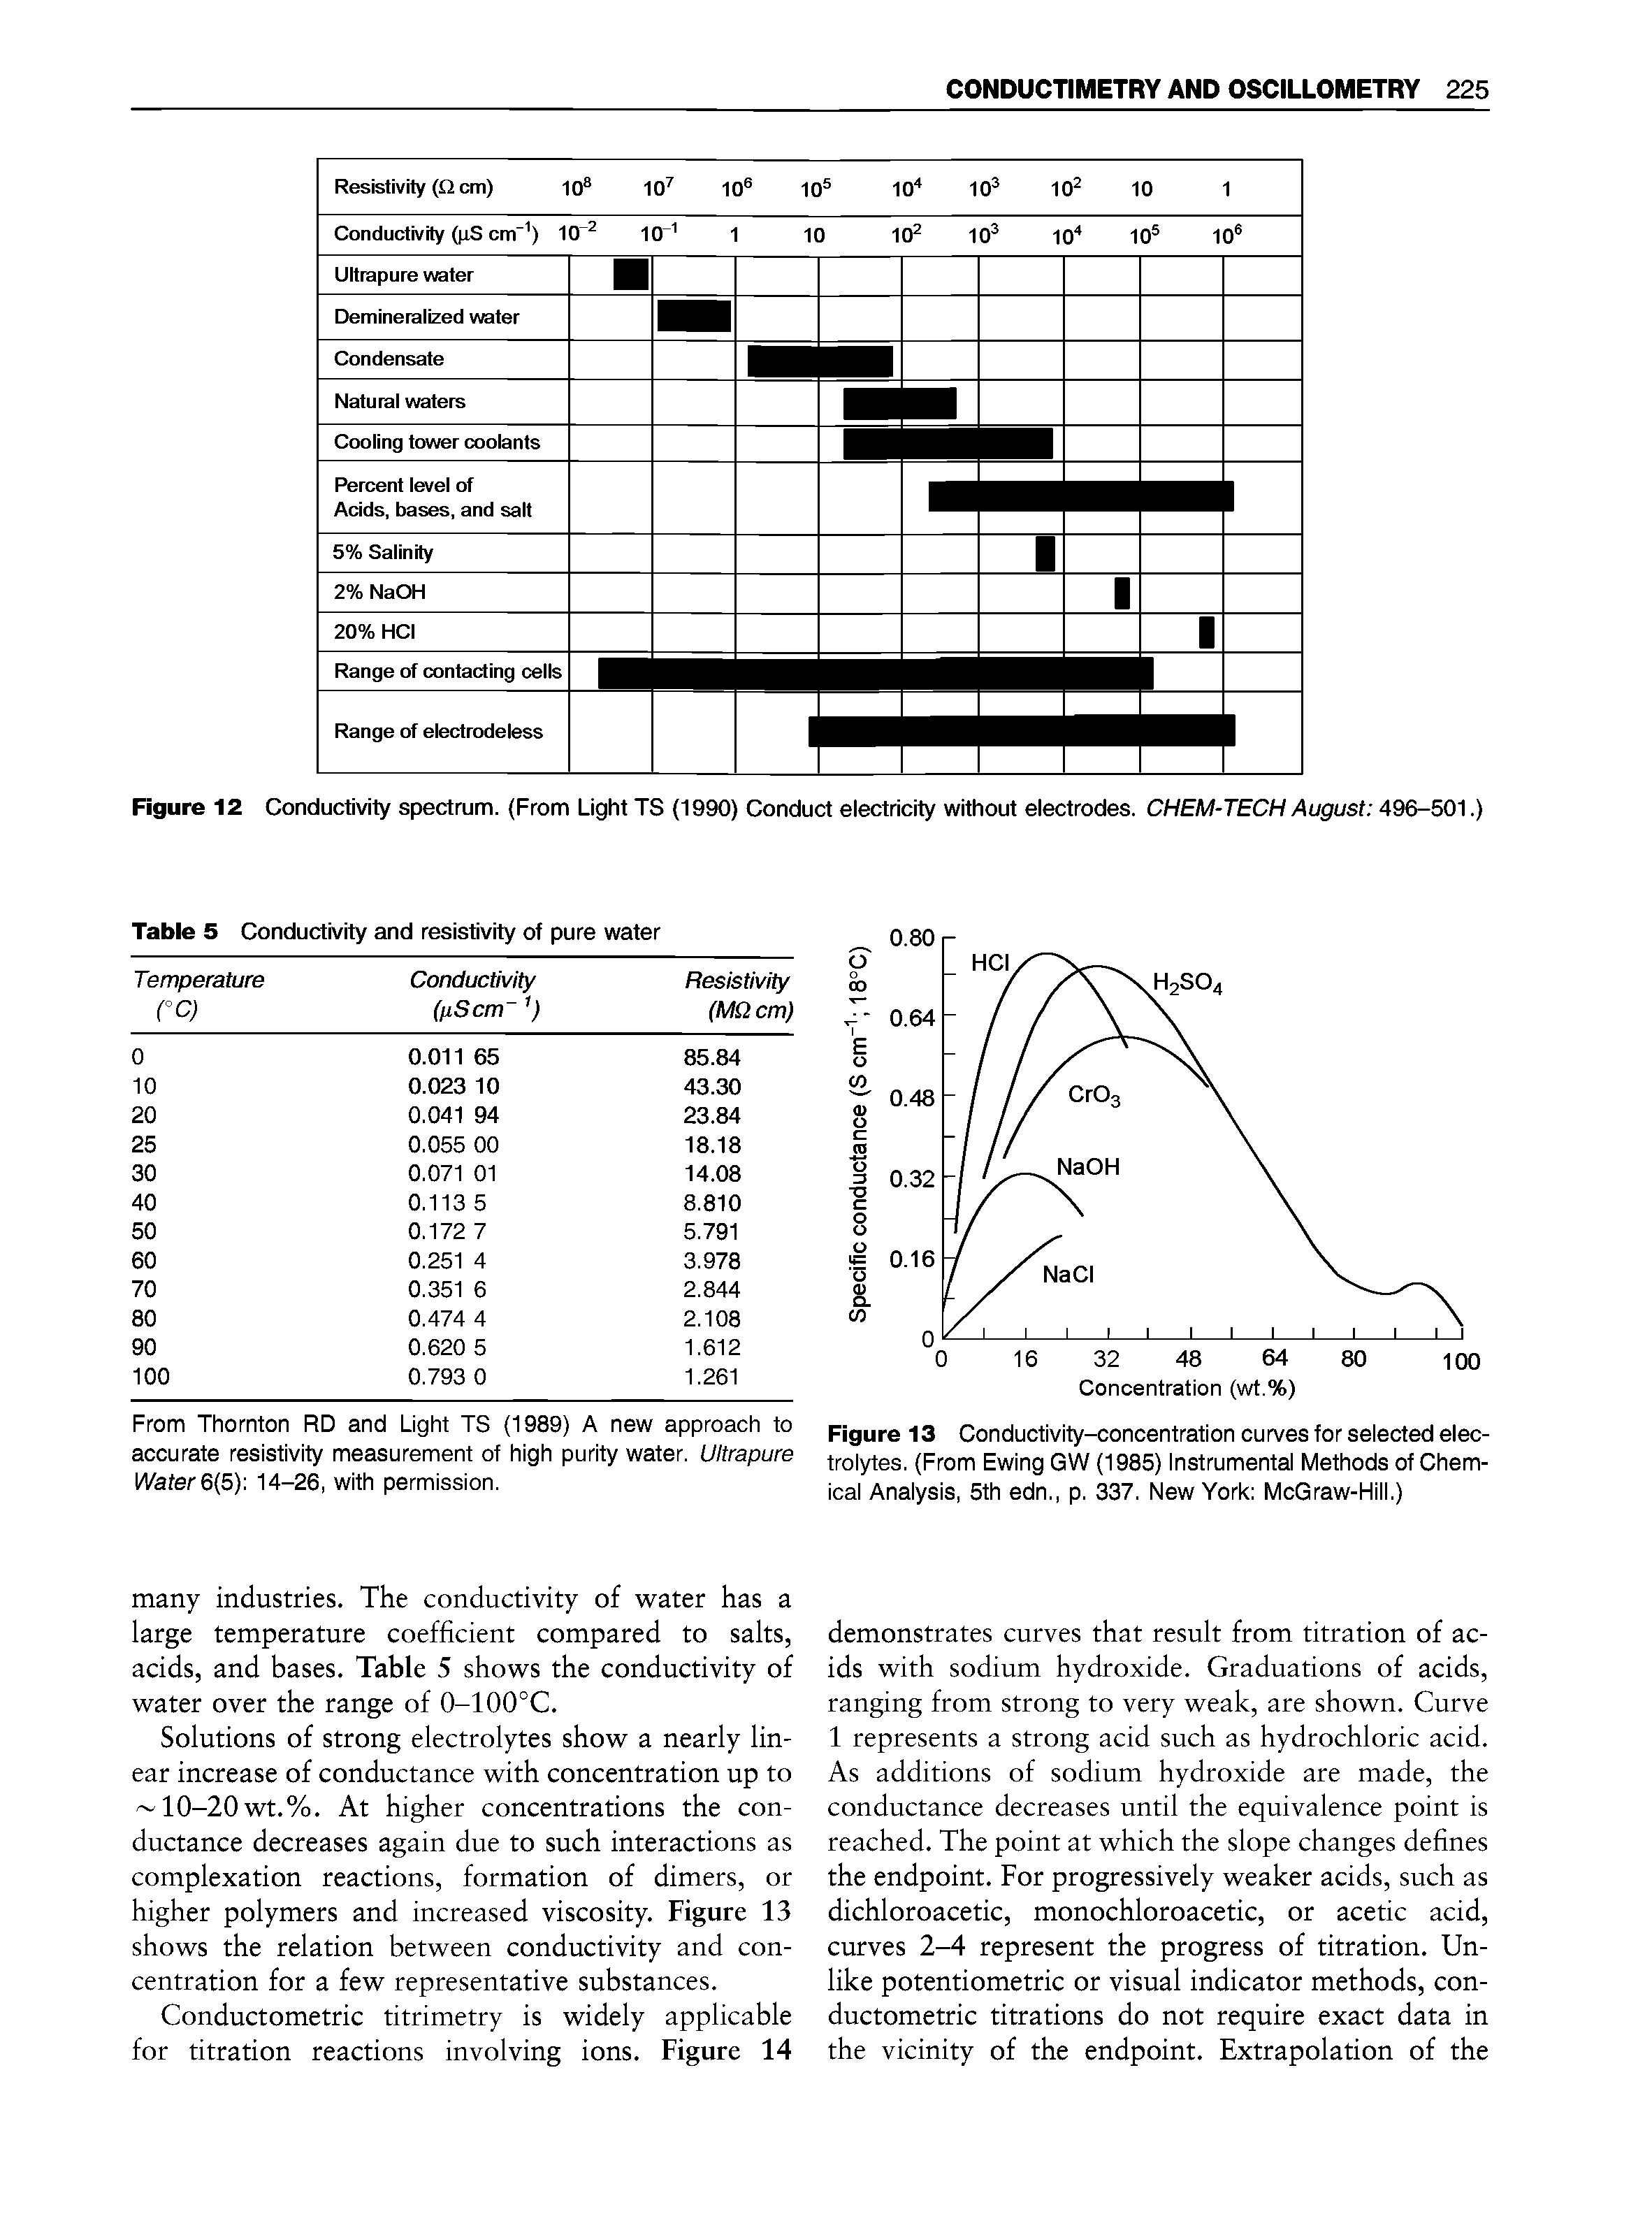 Figure 13 Conductivity-concentration curves for seiected elec-troiytes. (From Ewing GW (1985) instrumentai Methods of Chem-icai Anaiysis, 5th edn., p. 337. New York McGraw-Hiii.)...